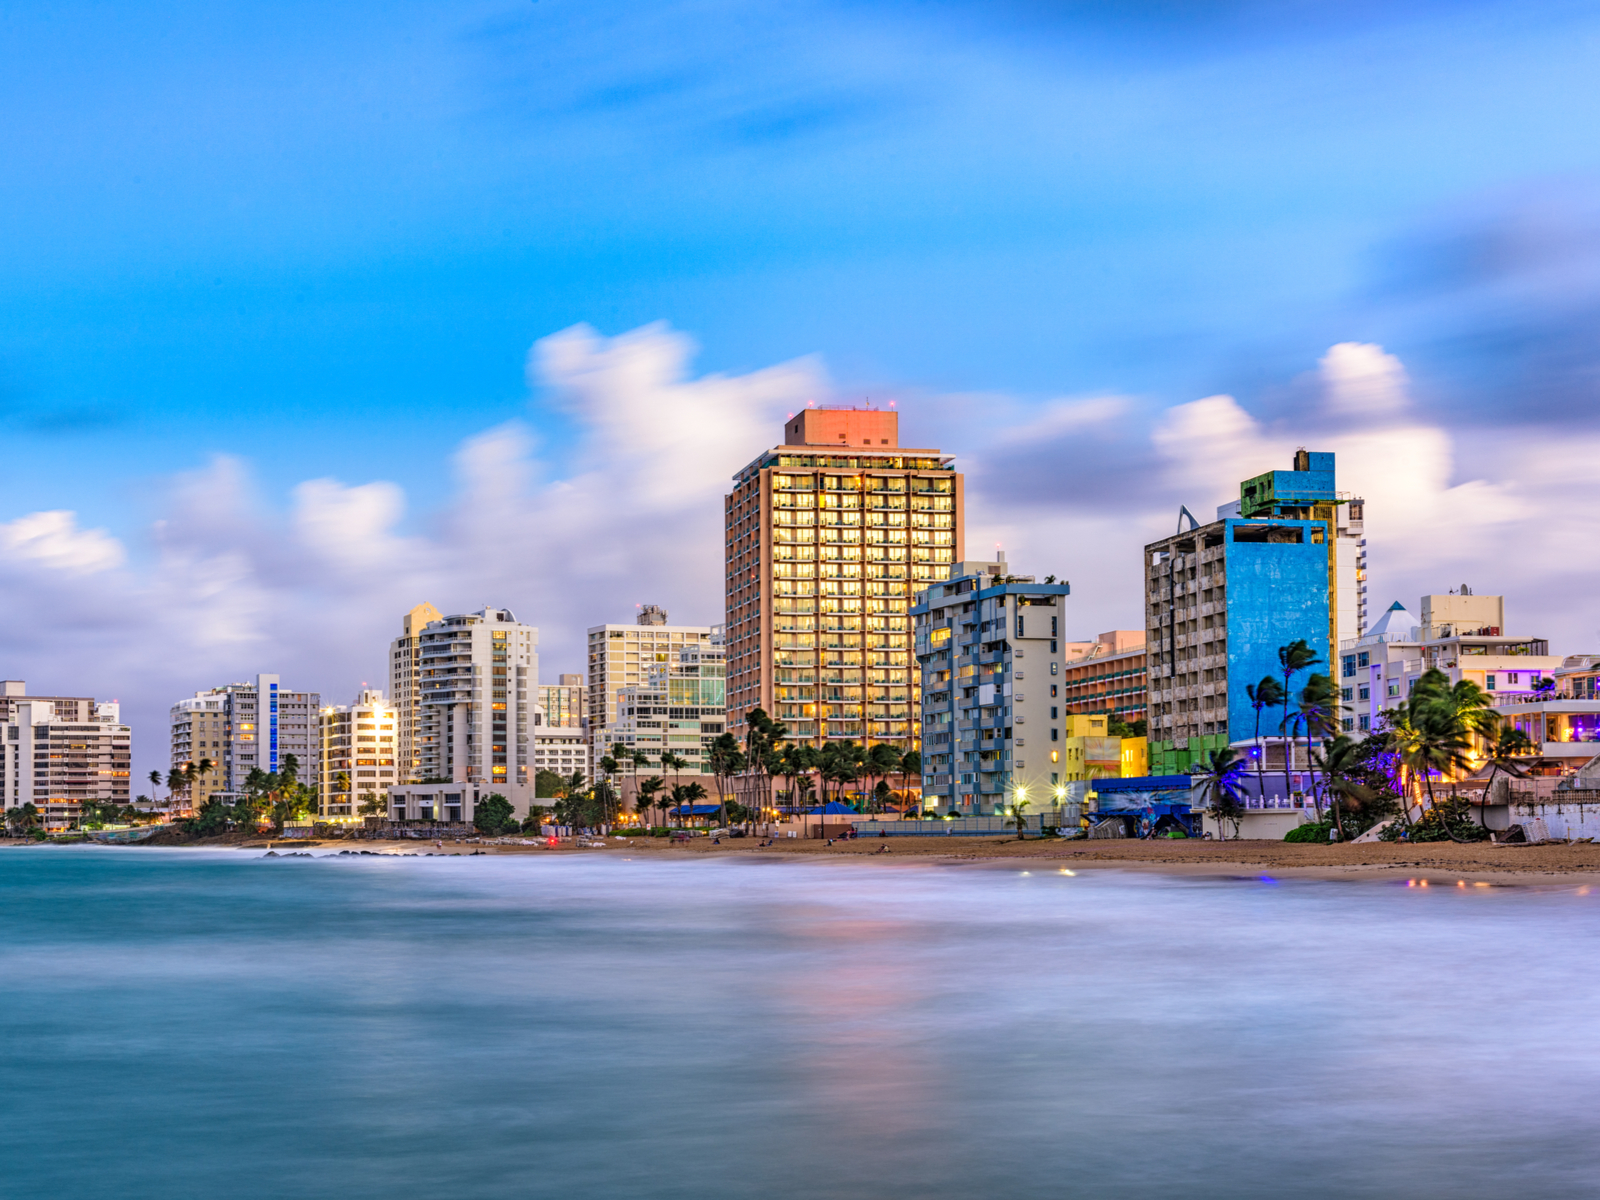 Condado Beach in San Juan pictured with resorts against the blue skyline